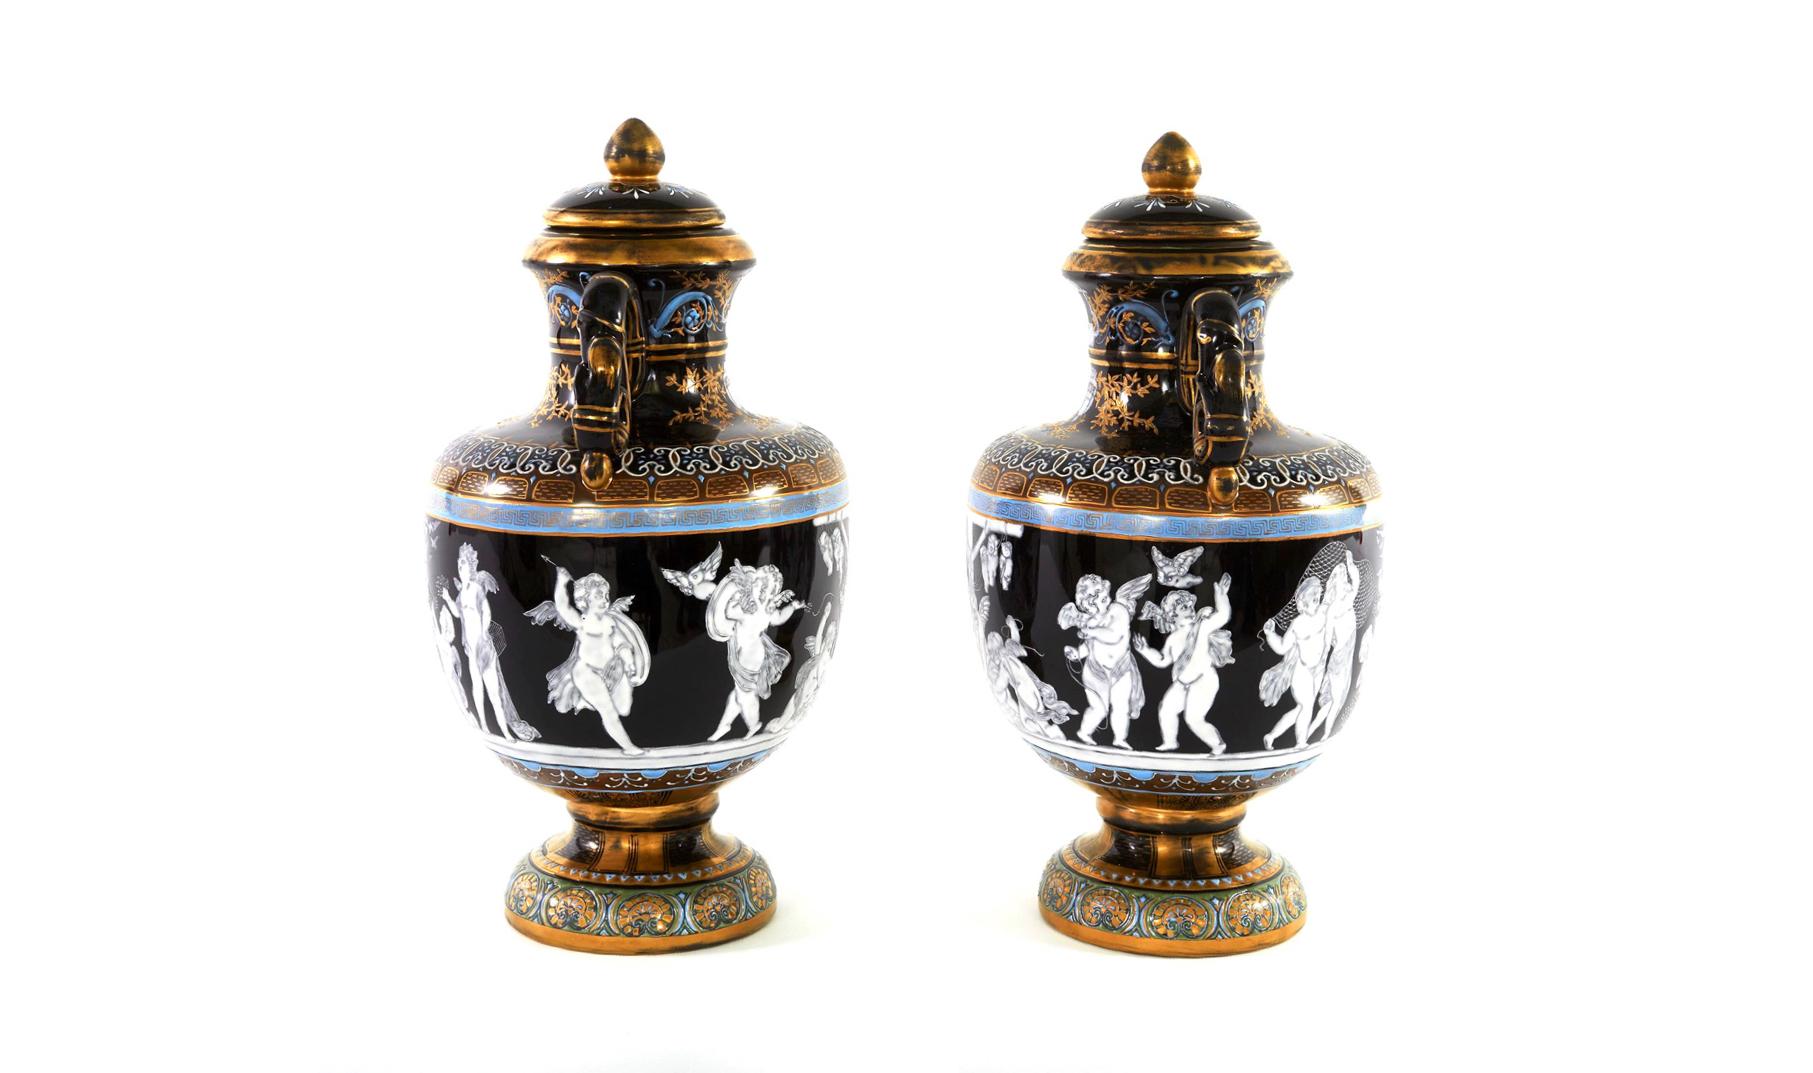 English Minton porcelain pair gilt gold covered decorative urns with exterior design details and two side handles. Each urn is in great condition. Minor wear consistent with age / use. Maker's mark ( crown ). MINTON undersigned. Each one stands